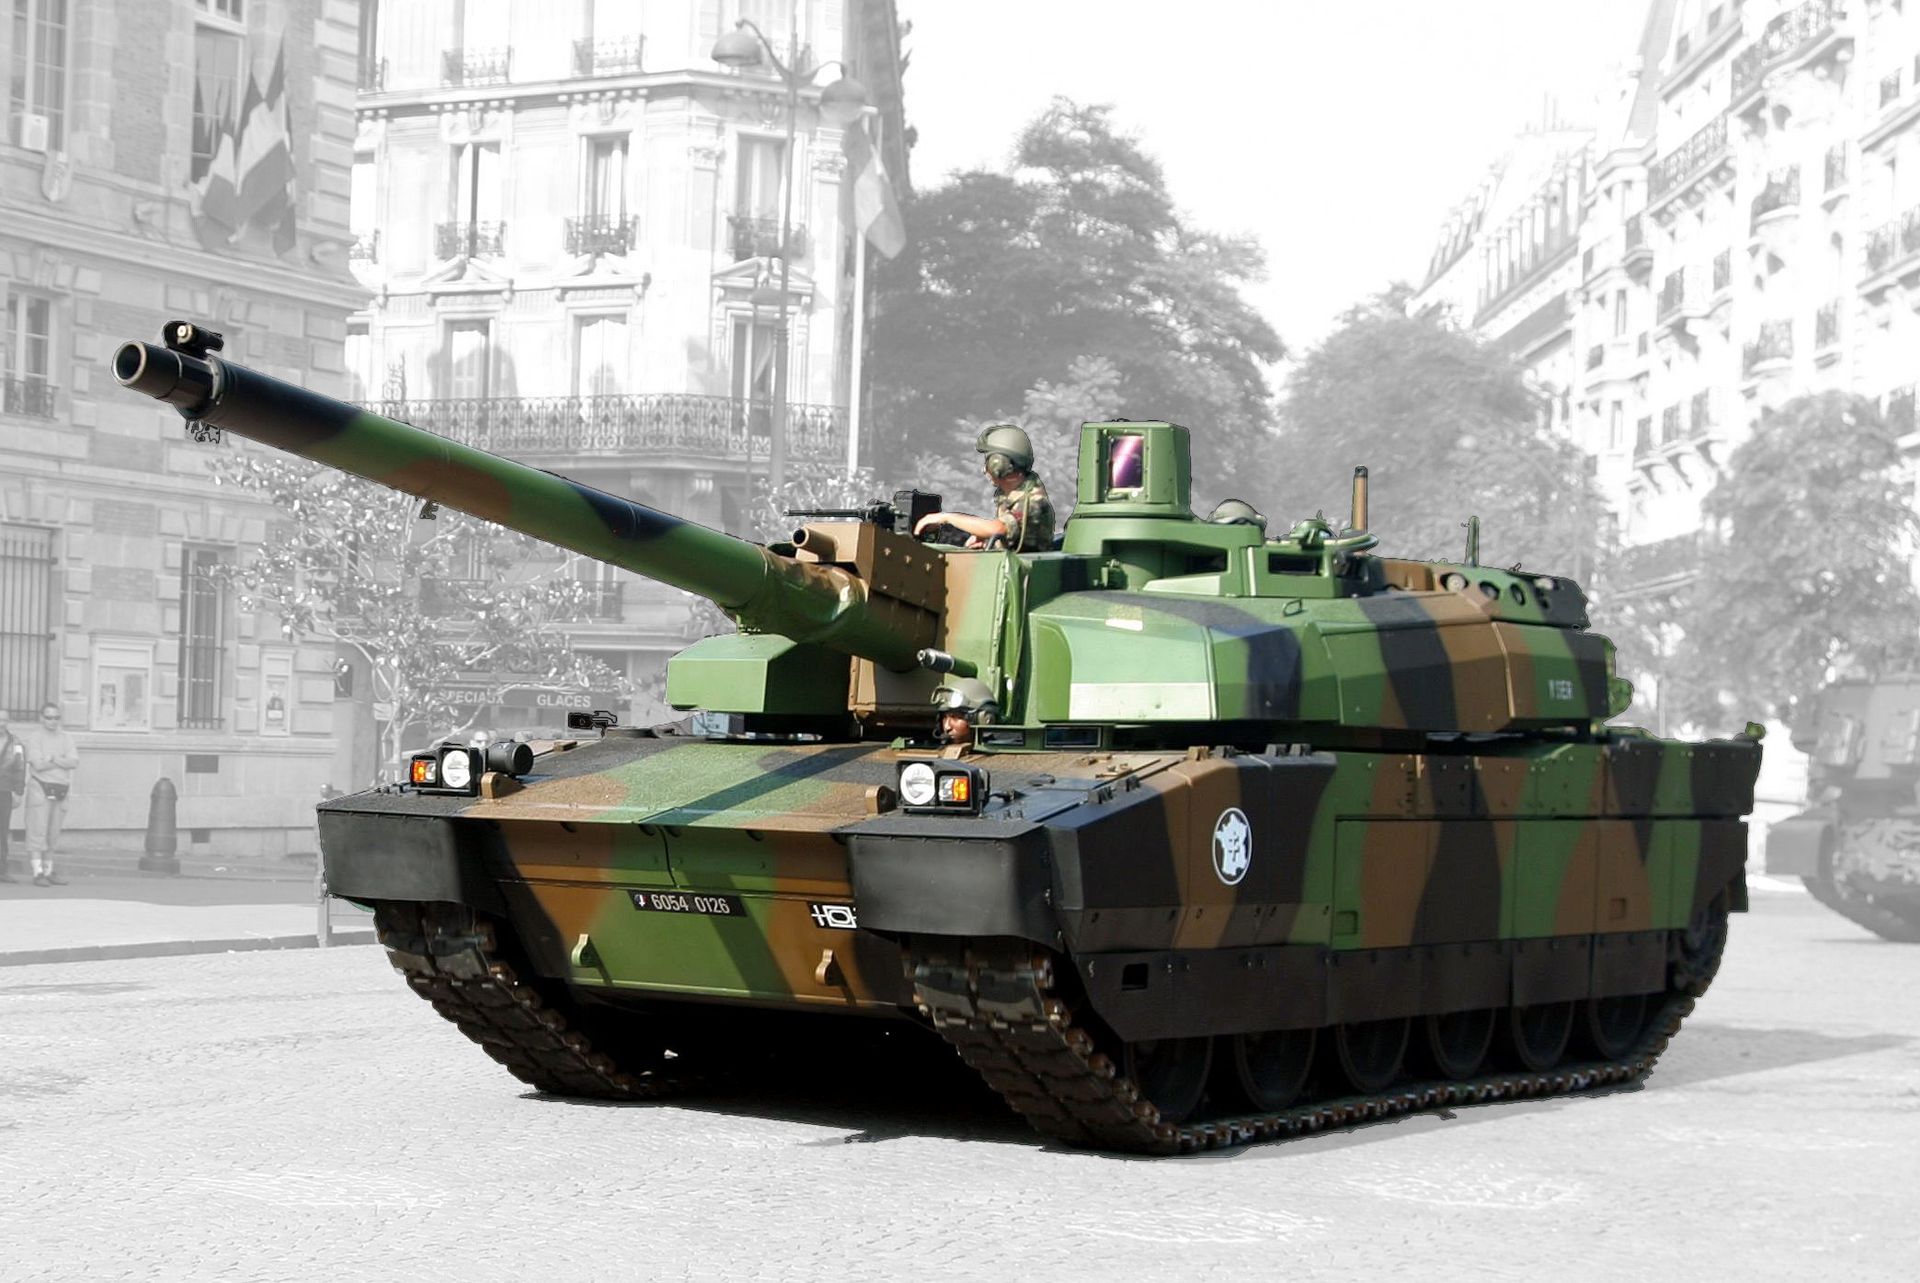 Leclerc Tank from France